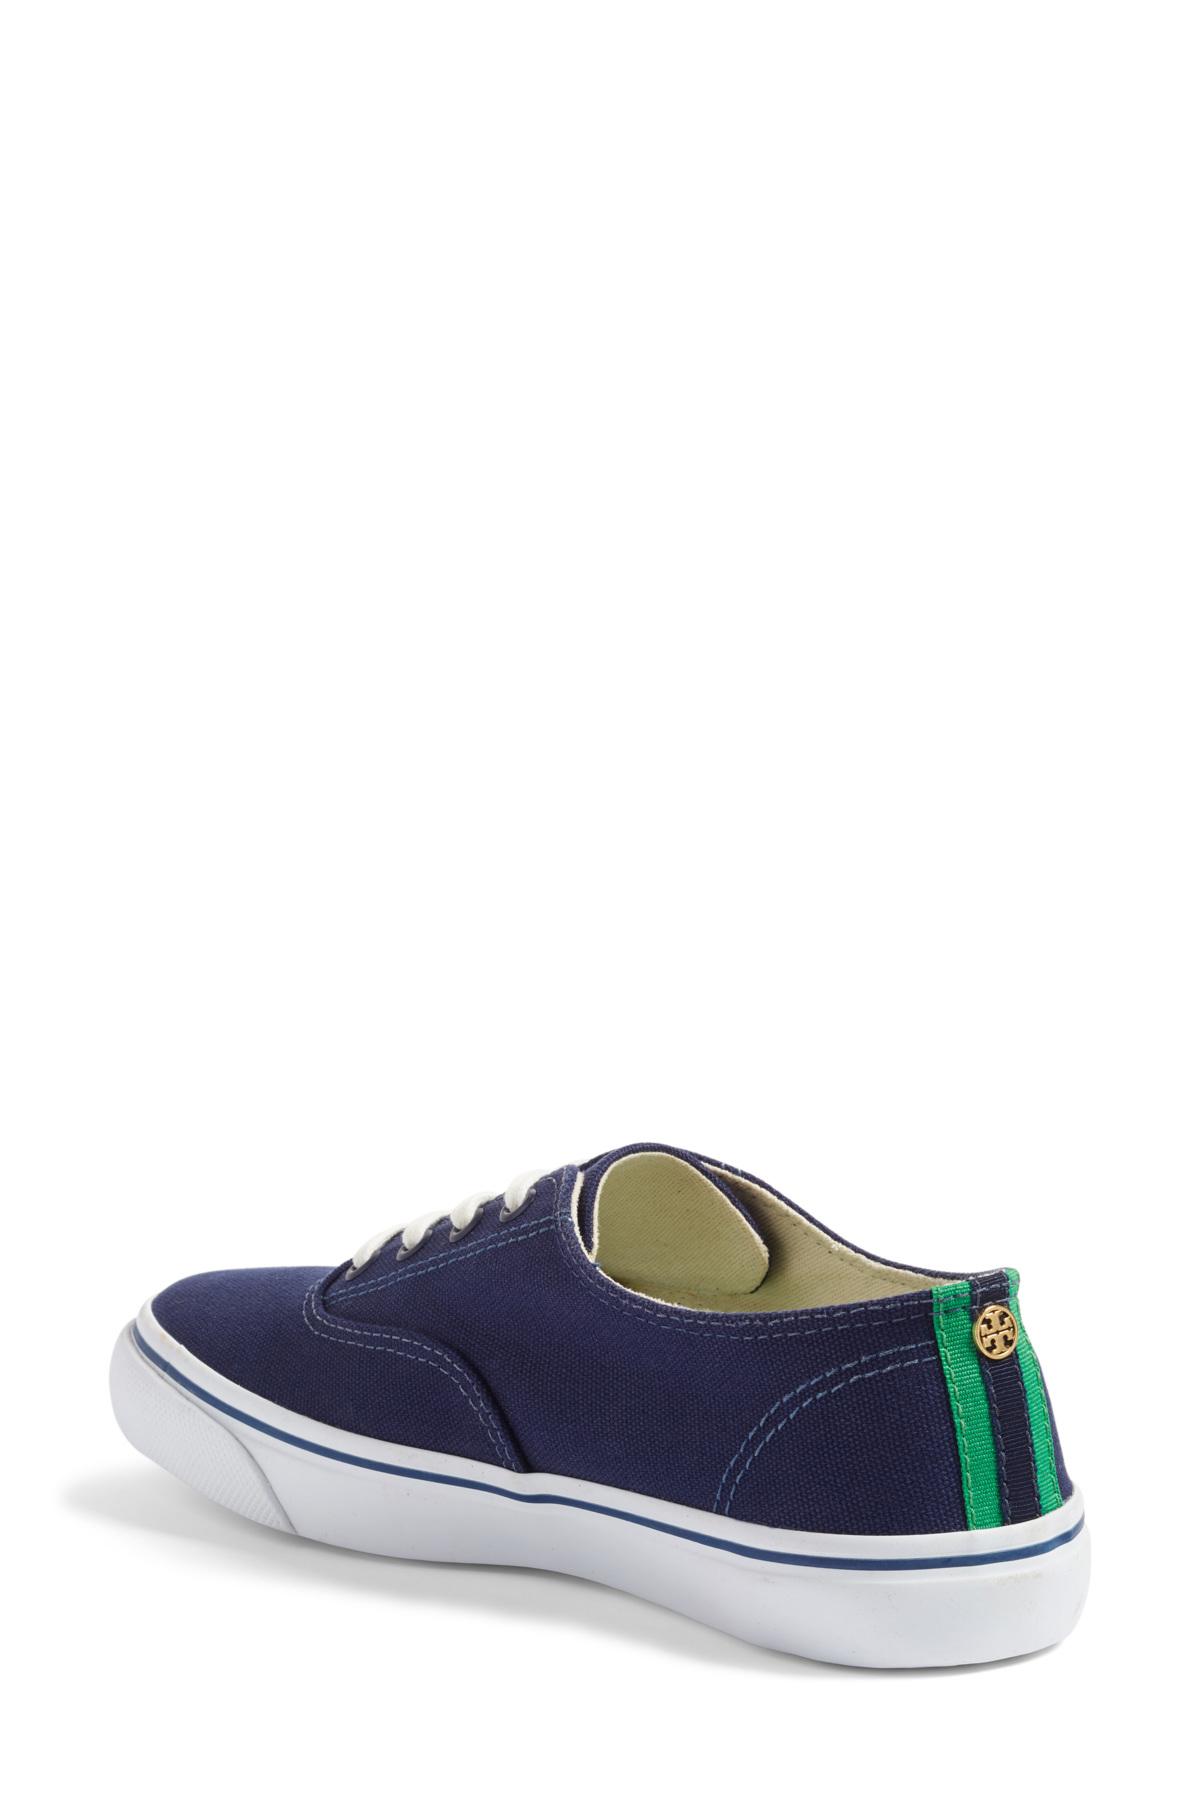 Tory Burch Synthetic Murray Sneaker 